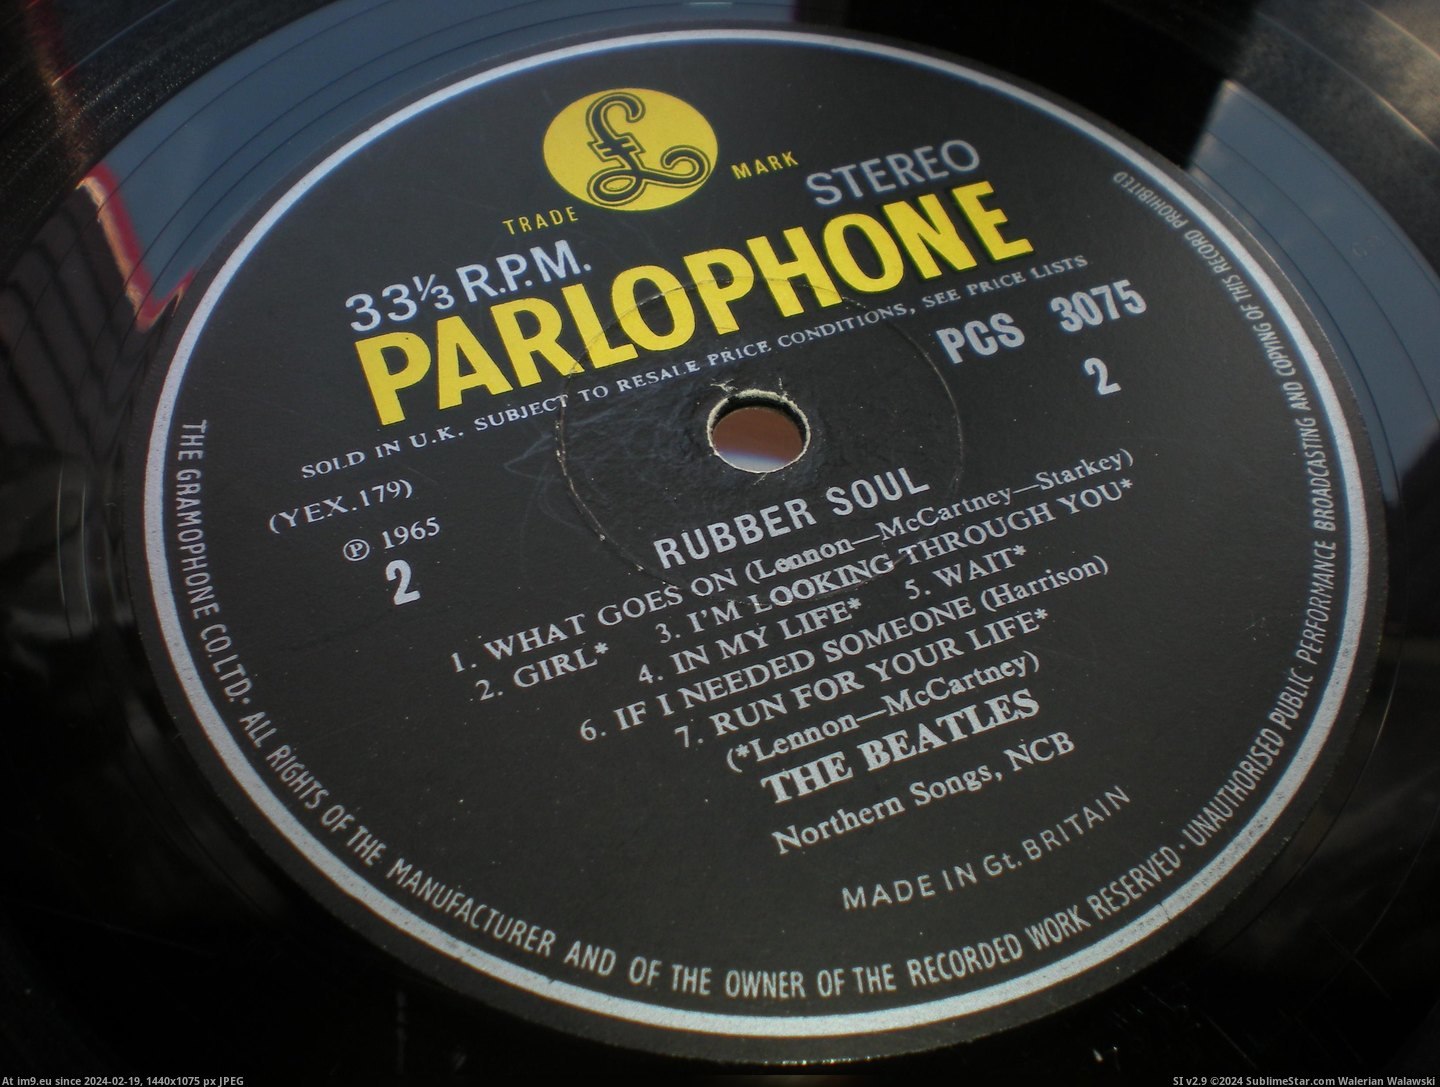 #Rubber #Stereo #Soul Rubber Soul STEREO 4 Pic. (Image of album new 1))